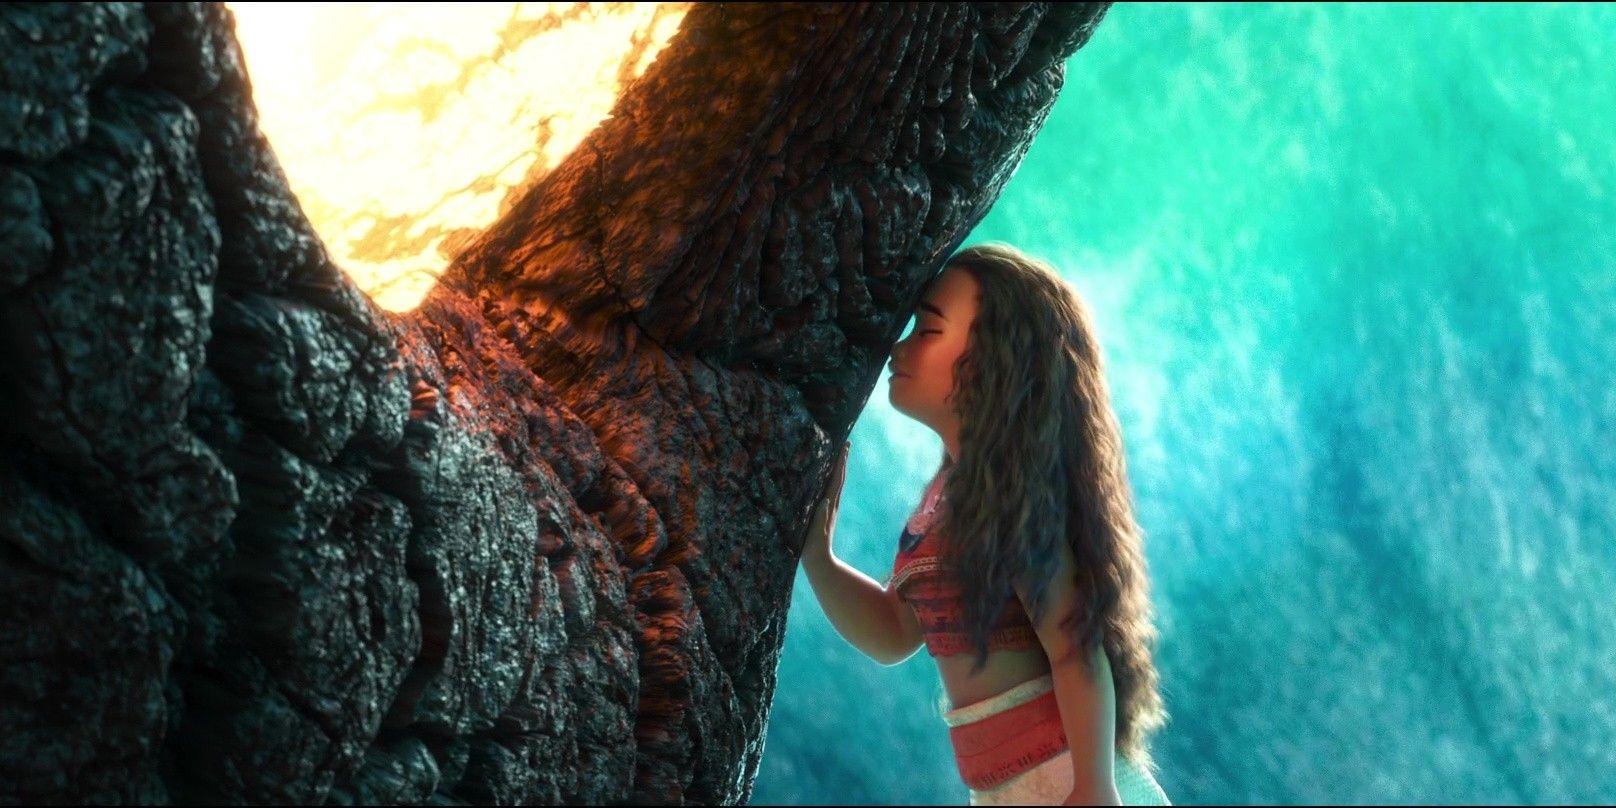 Moana tenderly touches her forehead to a tree in 'Moana' (2016).